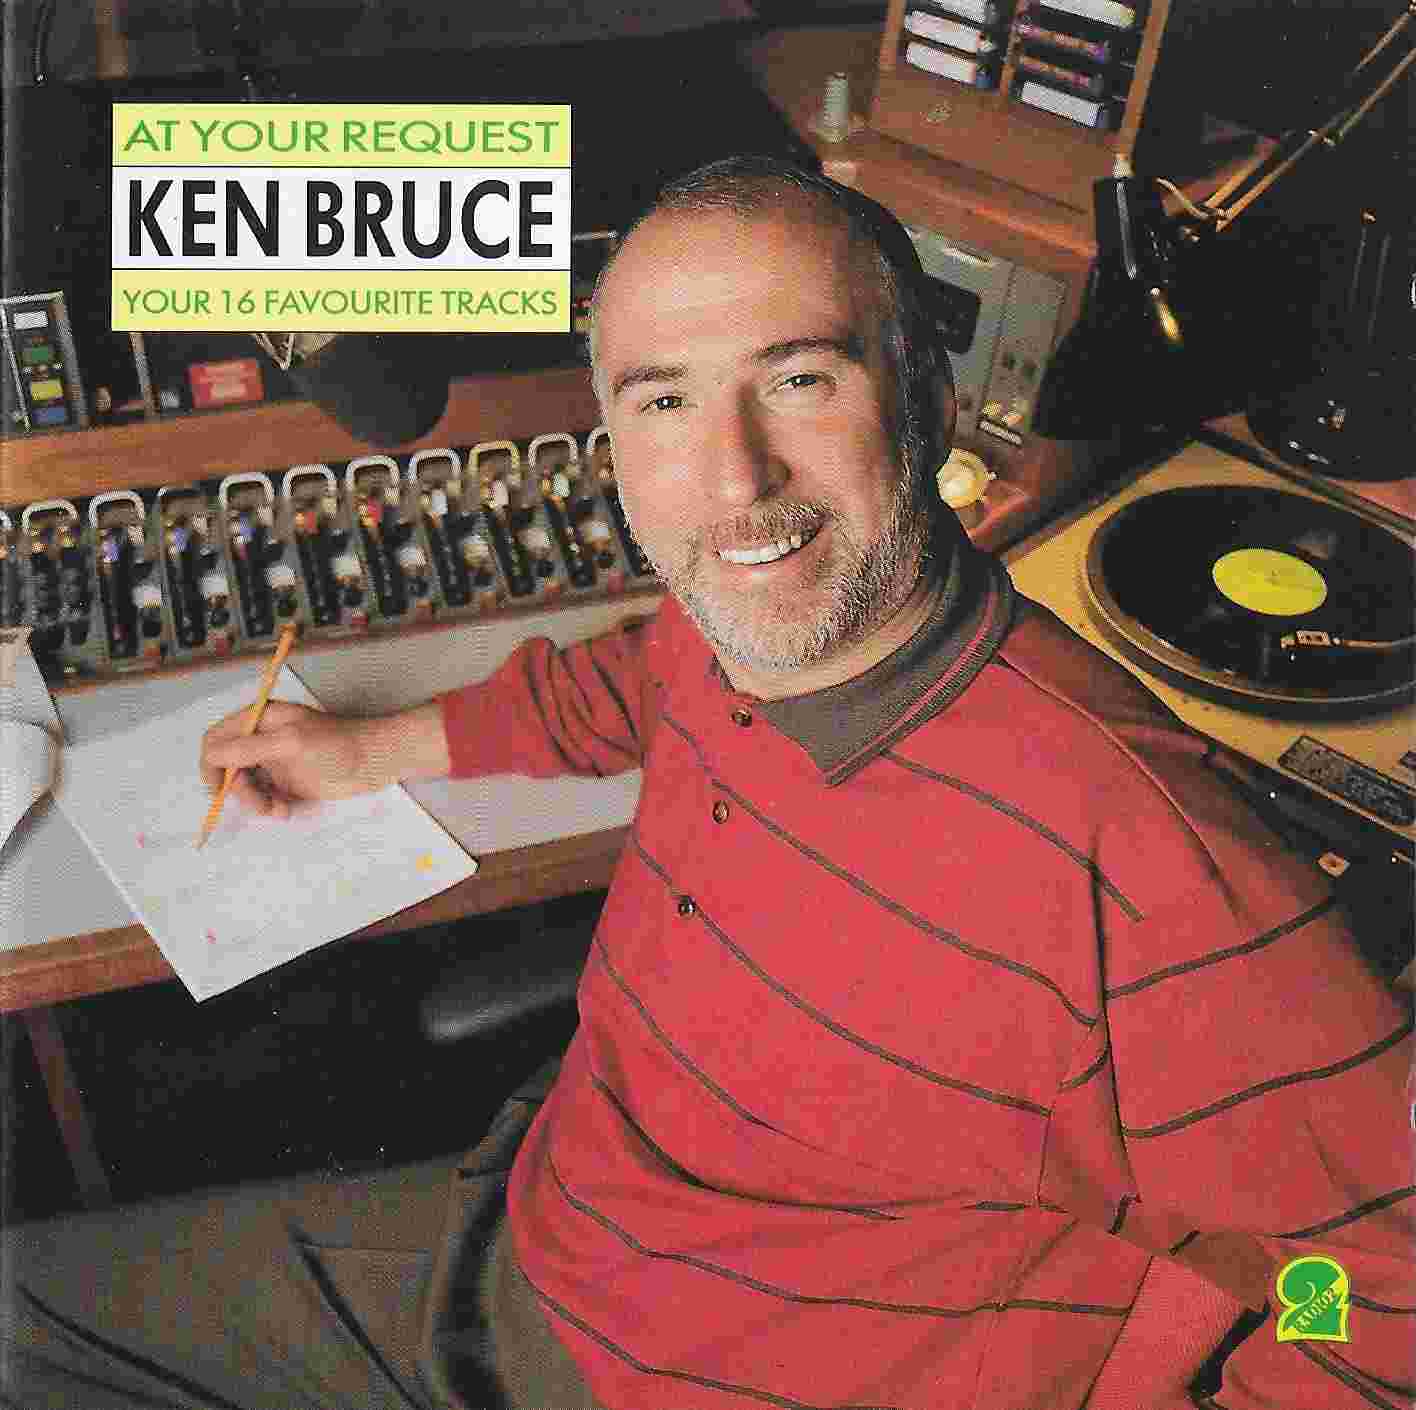 Picture of BBCCD710 At your request - Ken Bruce by artist Ken Bruce from the BBC cds - Records and Tapes library